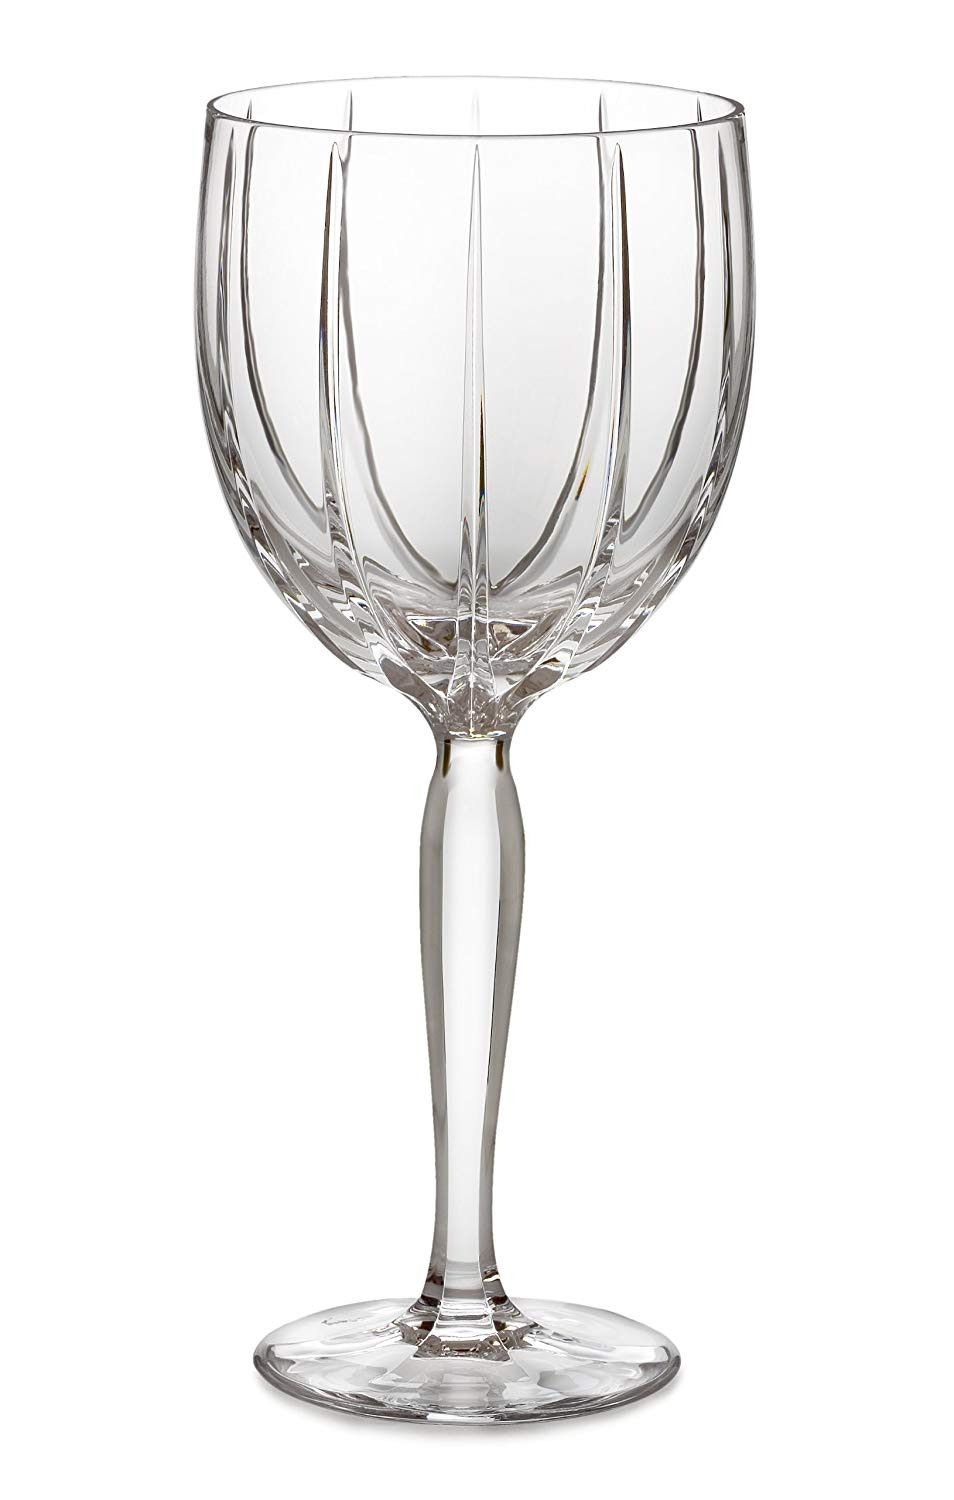 marquis by waterford vase sparkle of amazon com marquis by waterford omega all purpose wine glass set throughout amazon com marquis by waterford omega all purpose wine glass set of 4 goblets kitchen dining